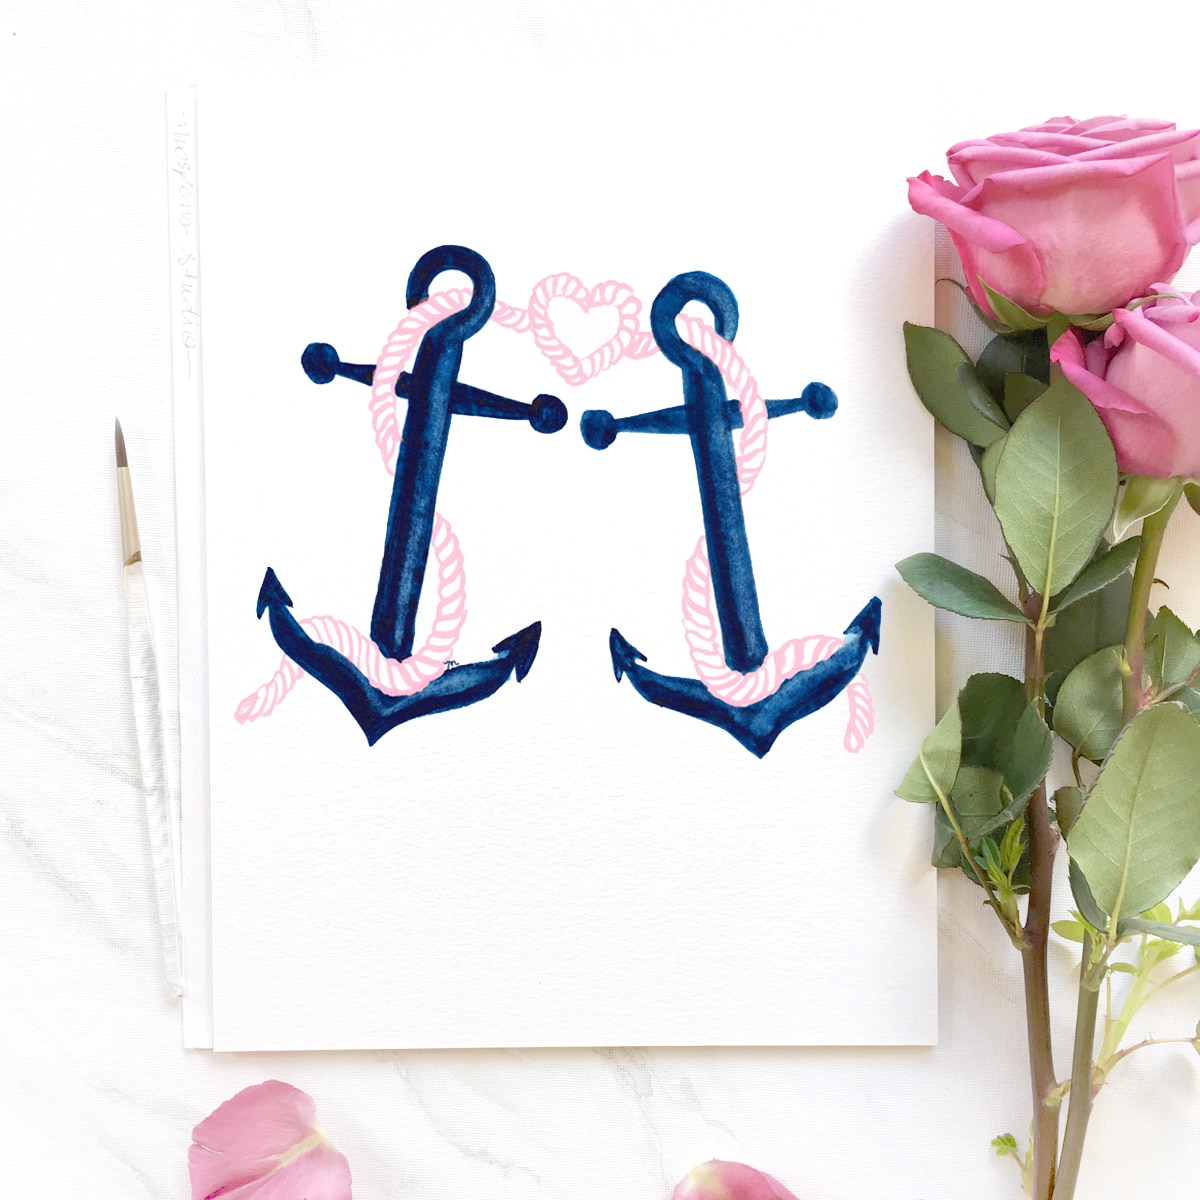 27 Sea-worthy Nautical Wedding Invitations. Hand-painted watercolor anchors with rope tied into heart by artist Michelle Mospens. | Mospens Studio